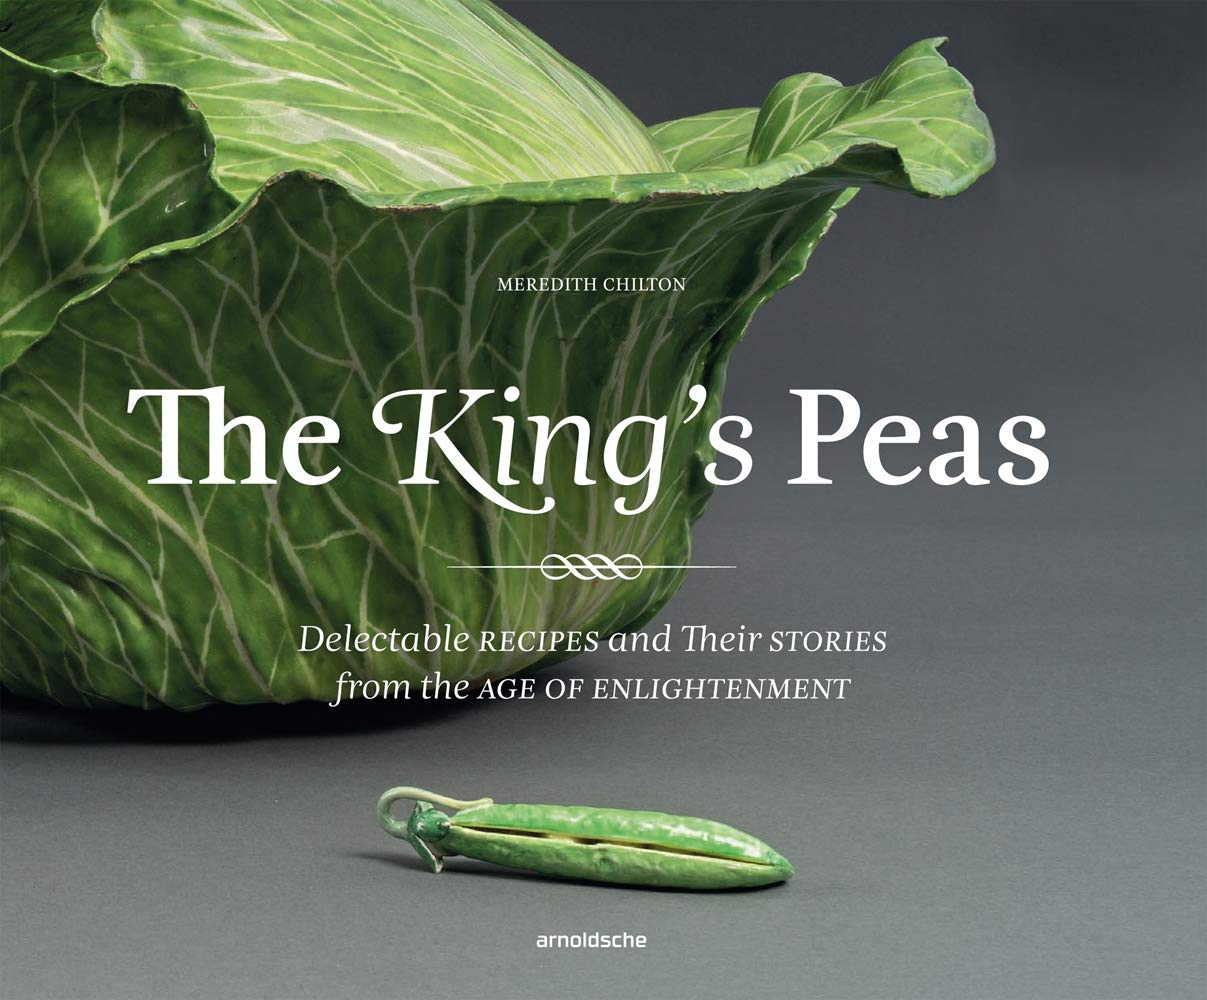 The King’s Peas: Delectable Recipes and Their Stories from the Age of Enlightenment Product Image 1 of 1